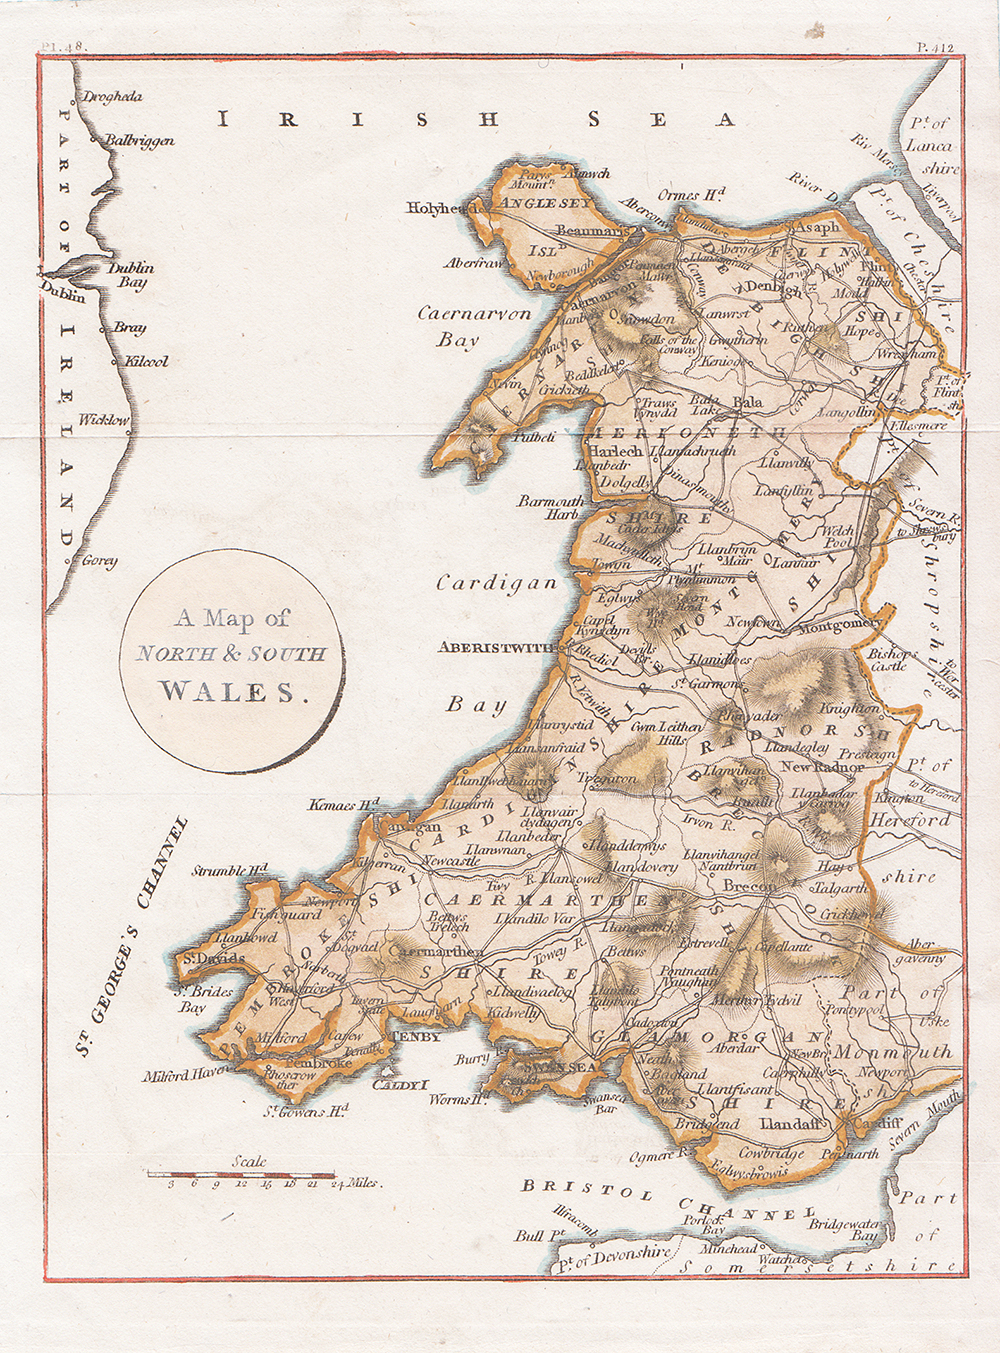 A Map of North & South Wales